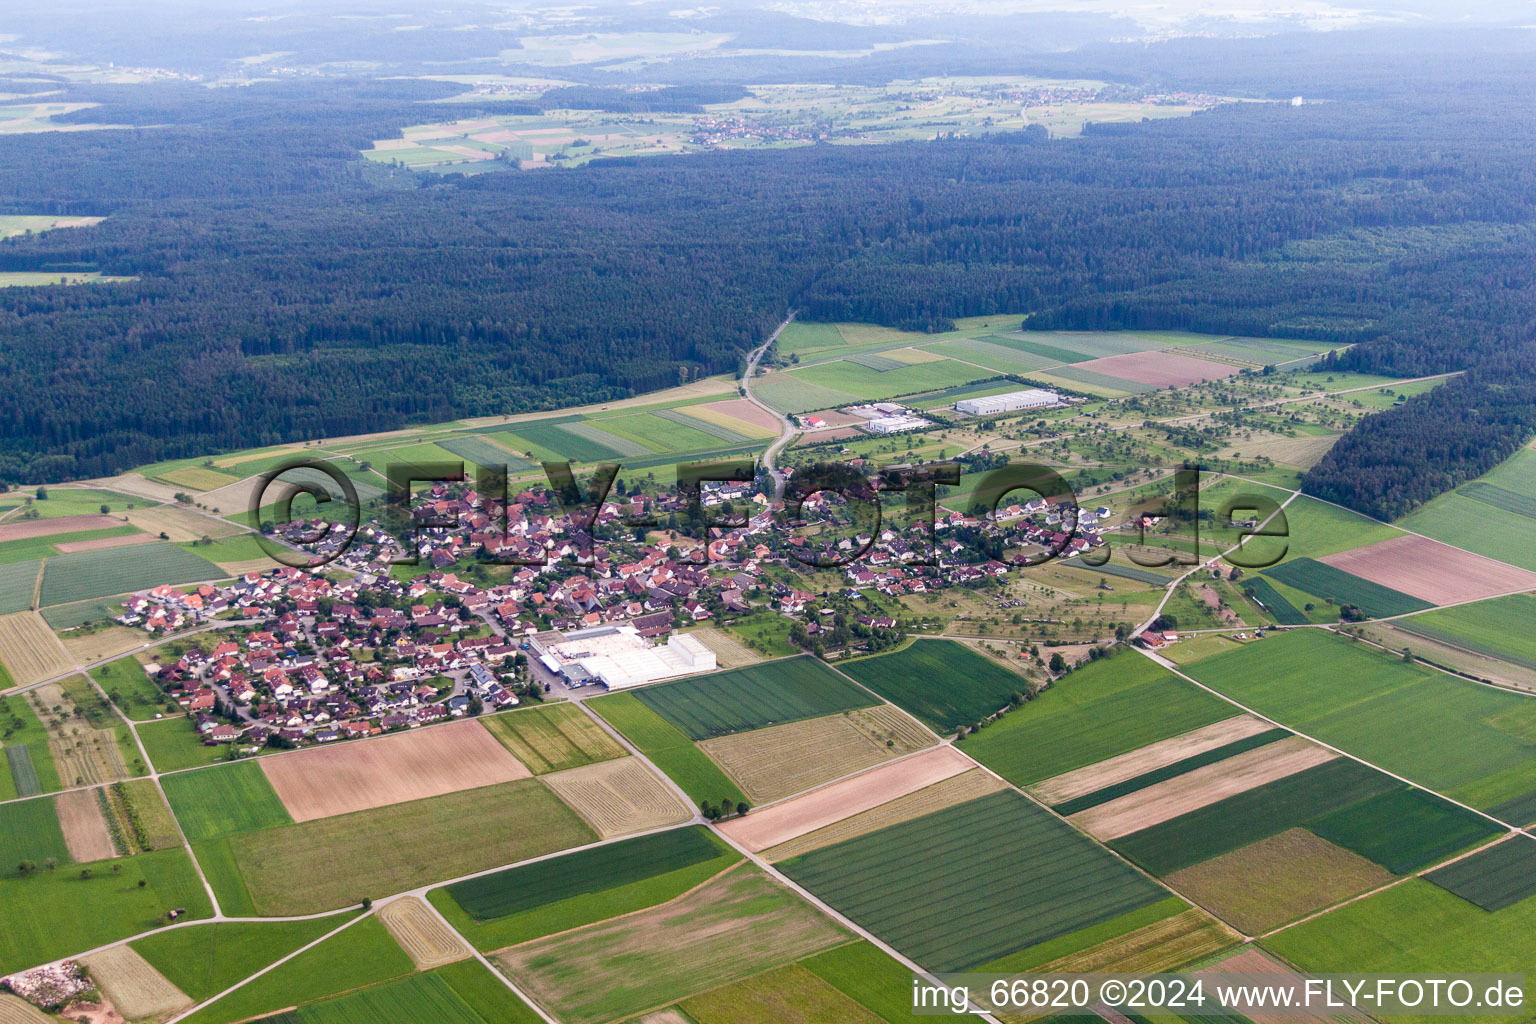 Village - view on the edge of agricultural fields and farmland in the district Oberhaugstett in Neubulach in the state Baden-Wurttemberg, Germany